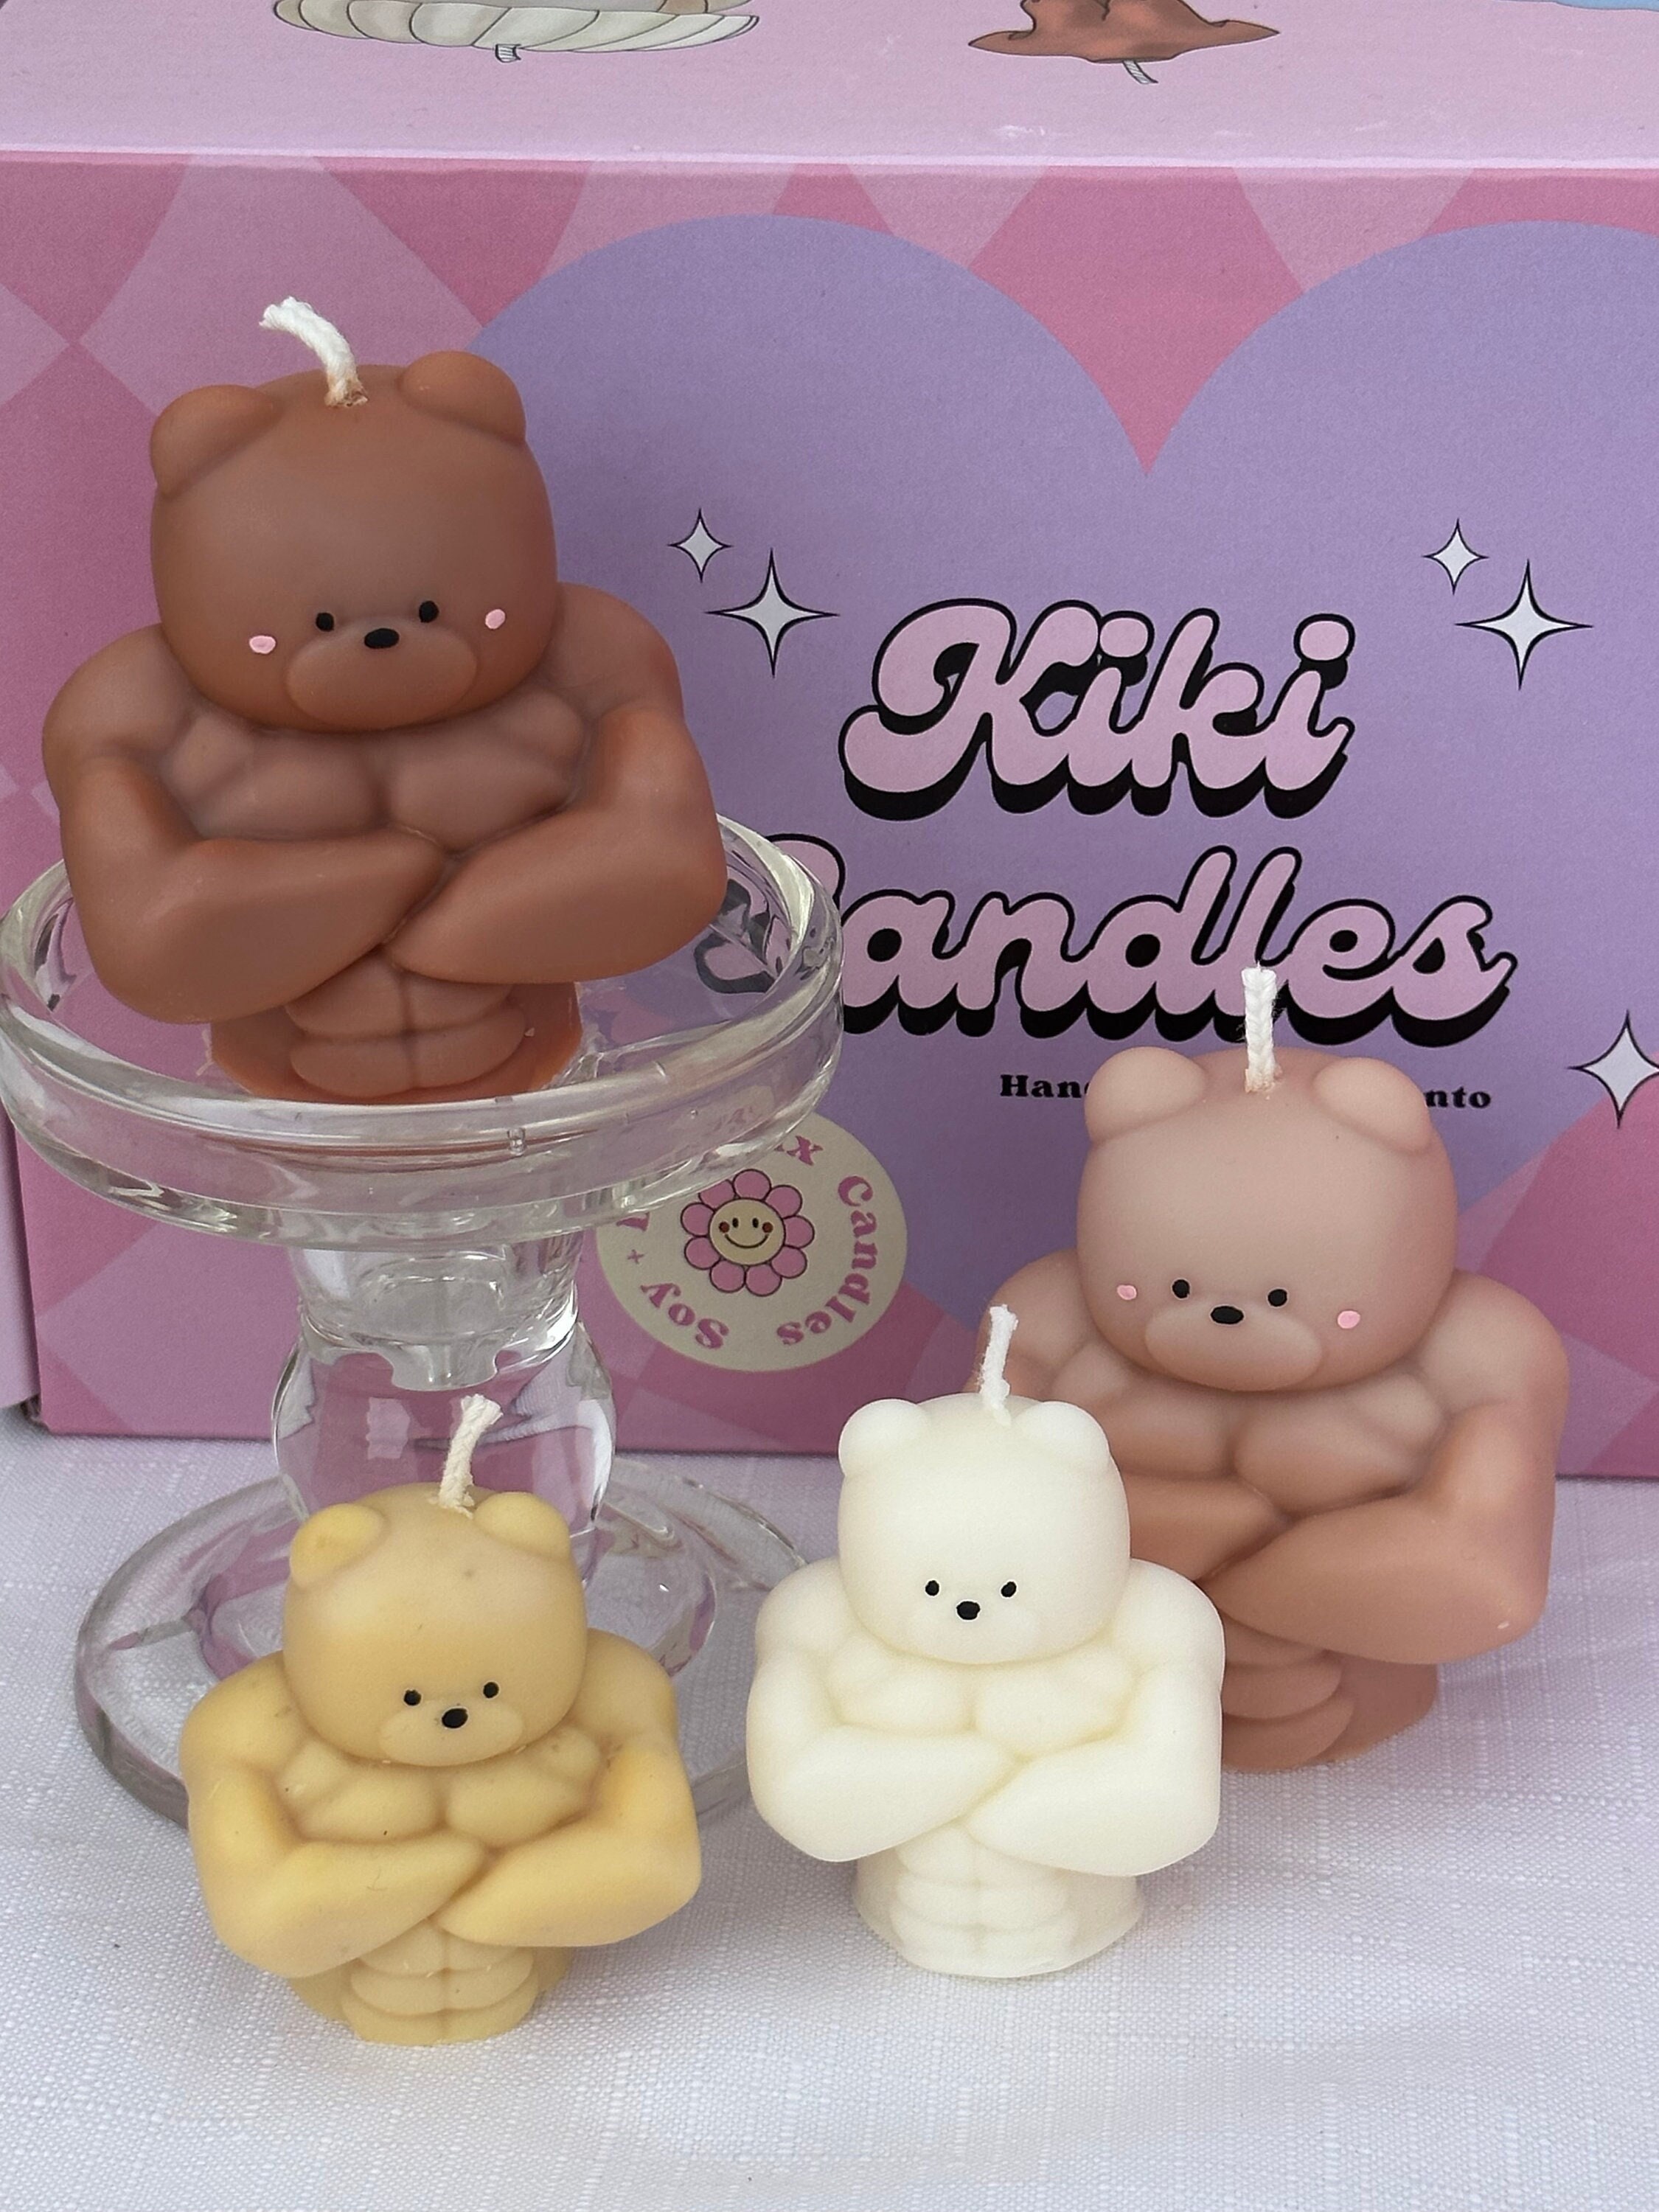  Teddy Bear Candle, For Vanilla Girl Aesthetic, Clean Girl  Aesthetic Home Decor Candle, Aesthetic Stuff For Bedroom Decor, Decorative  Candle for Cute Room Decor Aesthetic, Cute christmas gifts : Handmade  Products